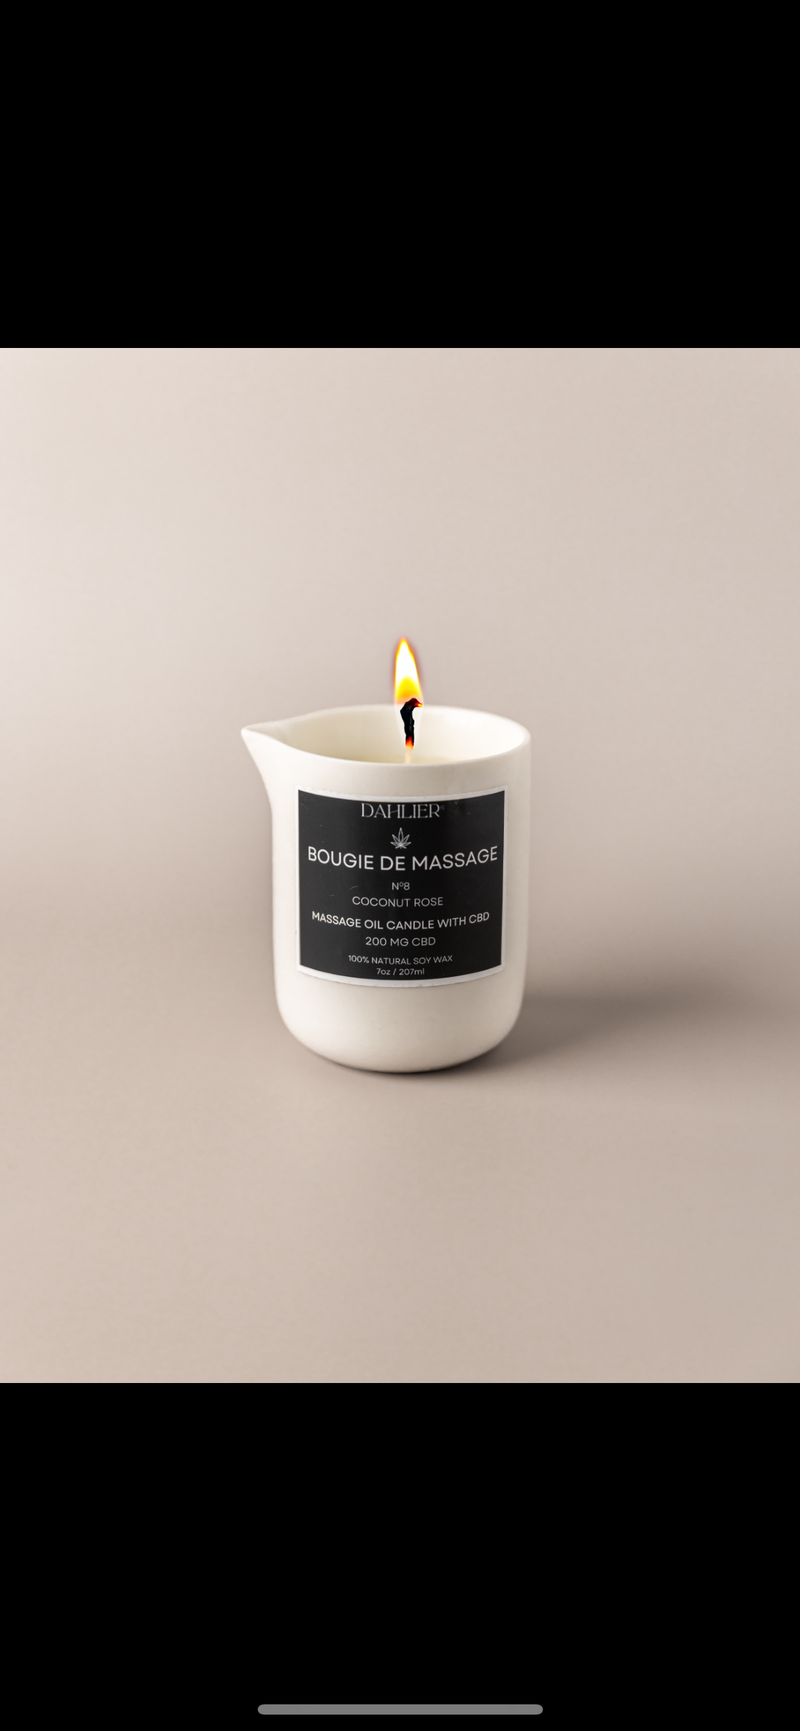 Dahlier Massage Oil Candle with CBD